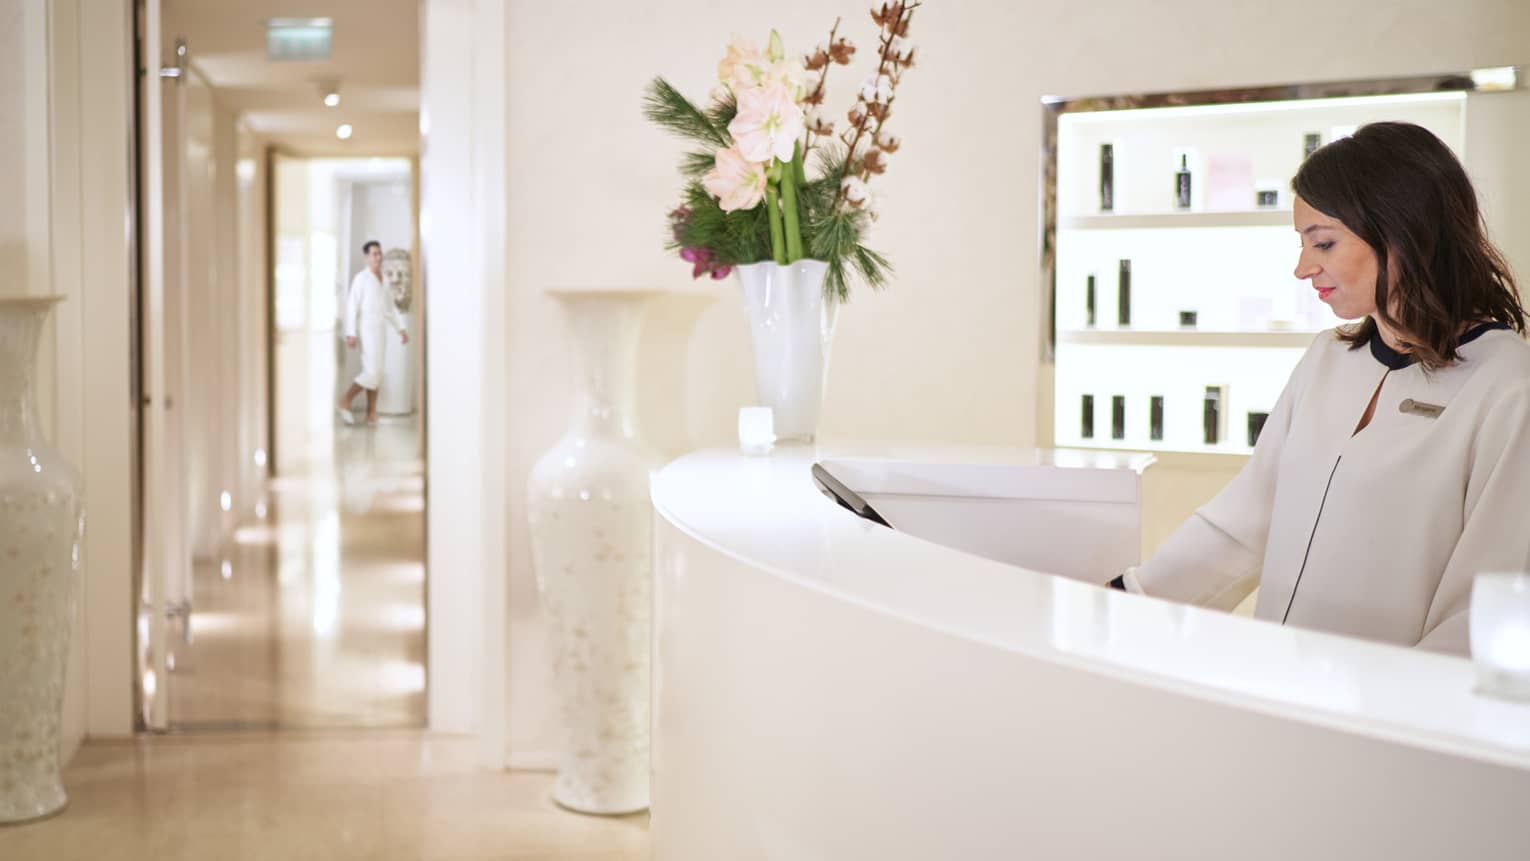 Staff member in white jacket standing behind curved white reception desk with flower vase, view into spa hallway